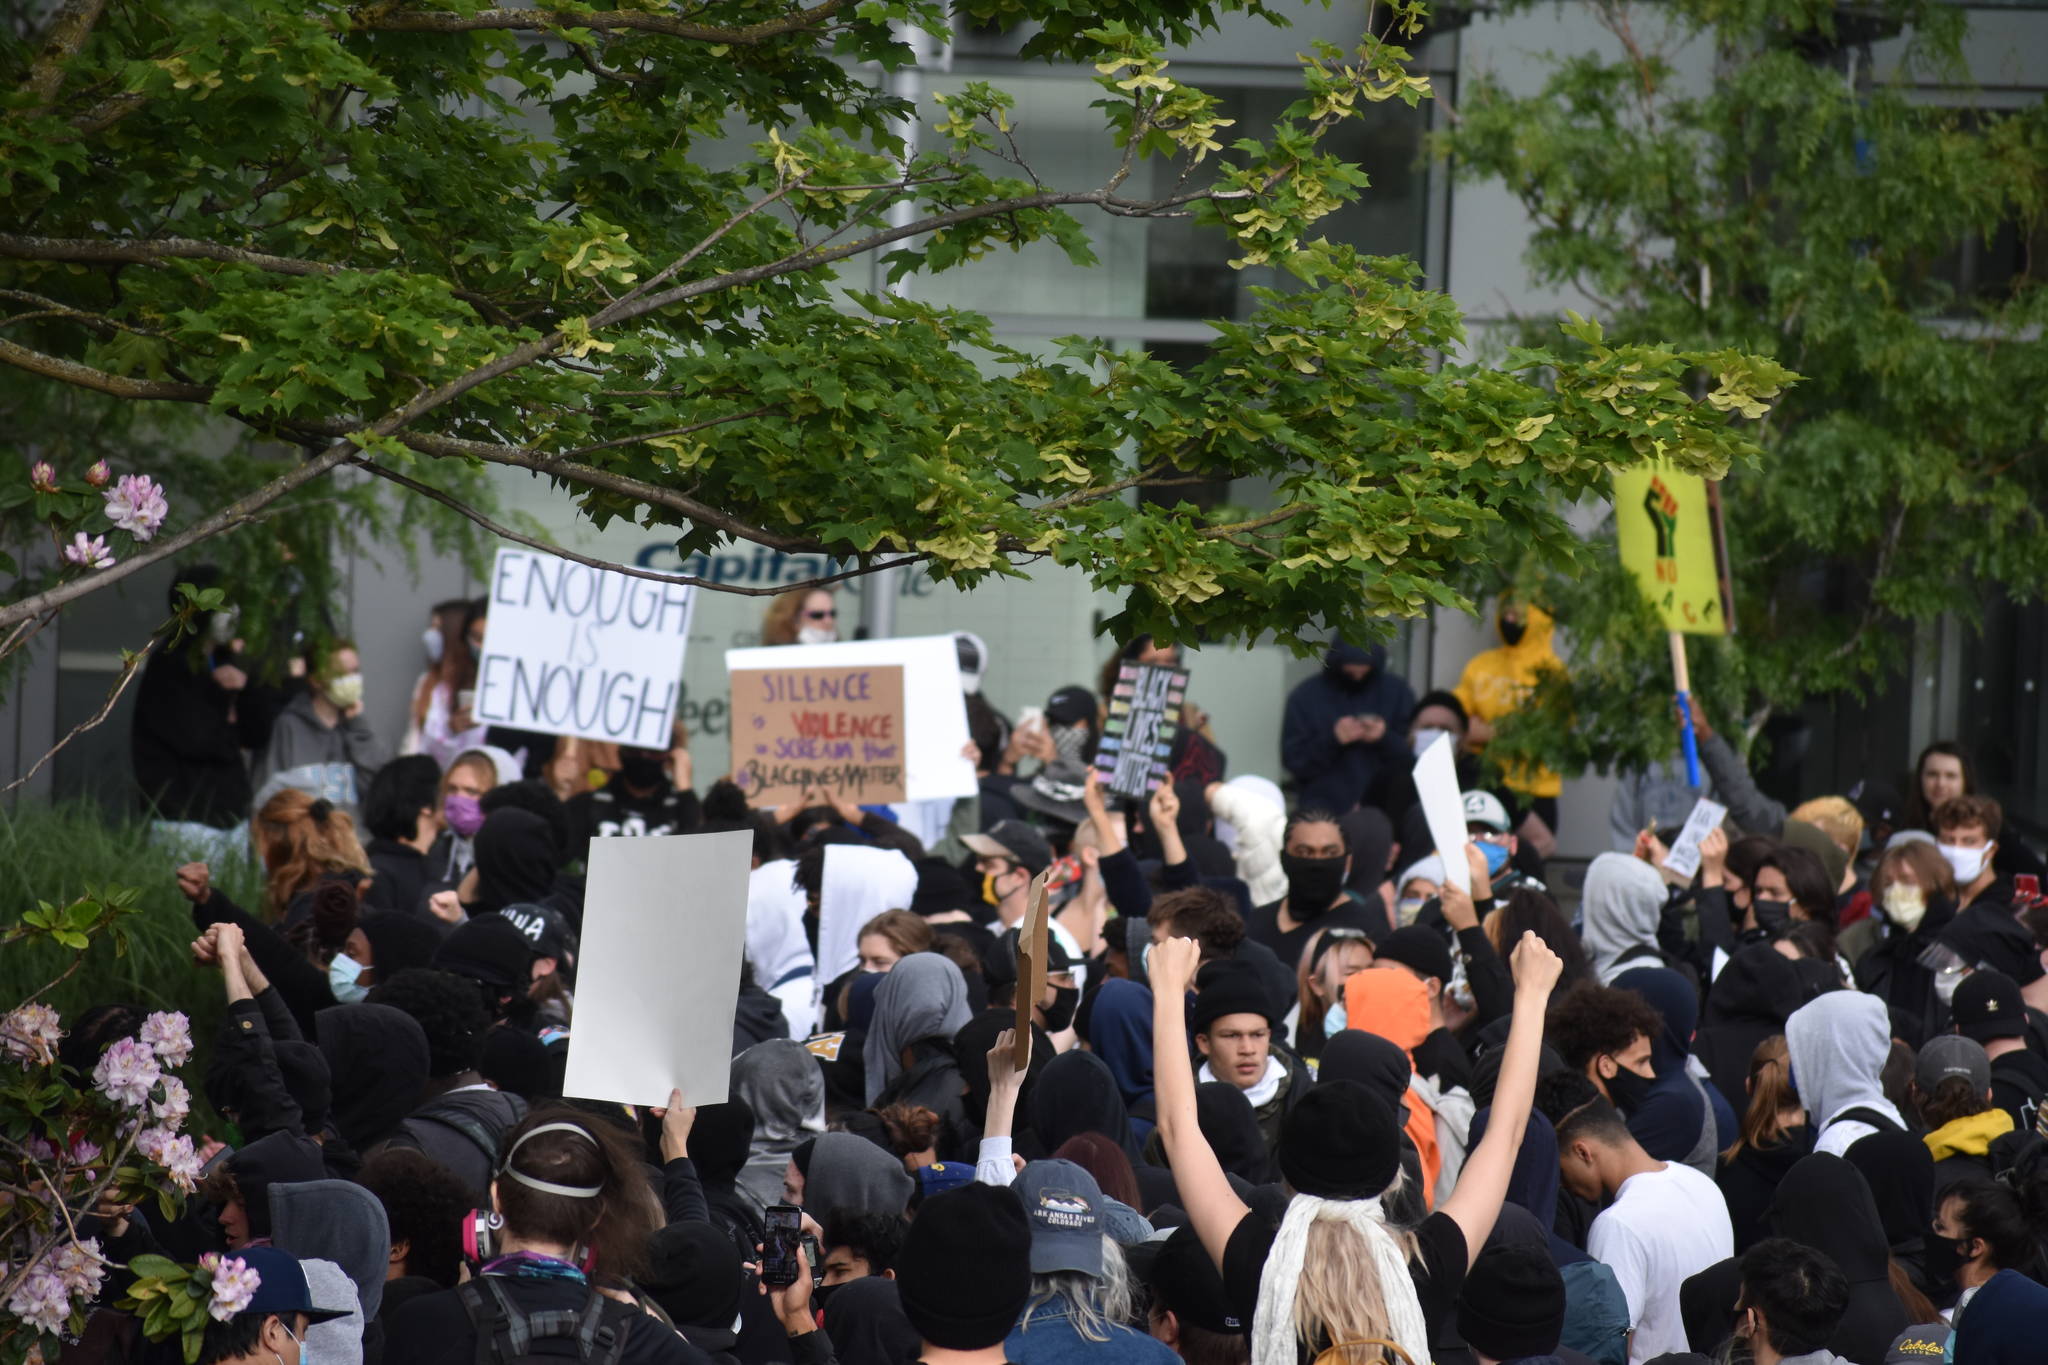 Roughly 300 protesters in downtown Bellevue, Sunday, May 31. Photo by Haley Ausbun/Sound Publishing